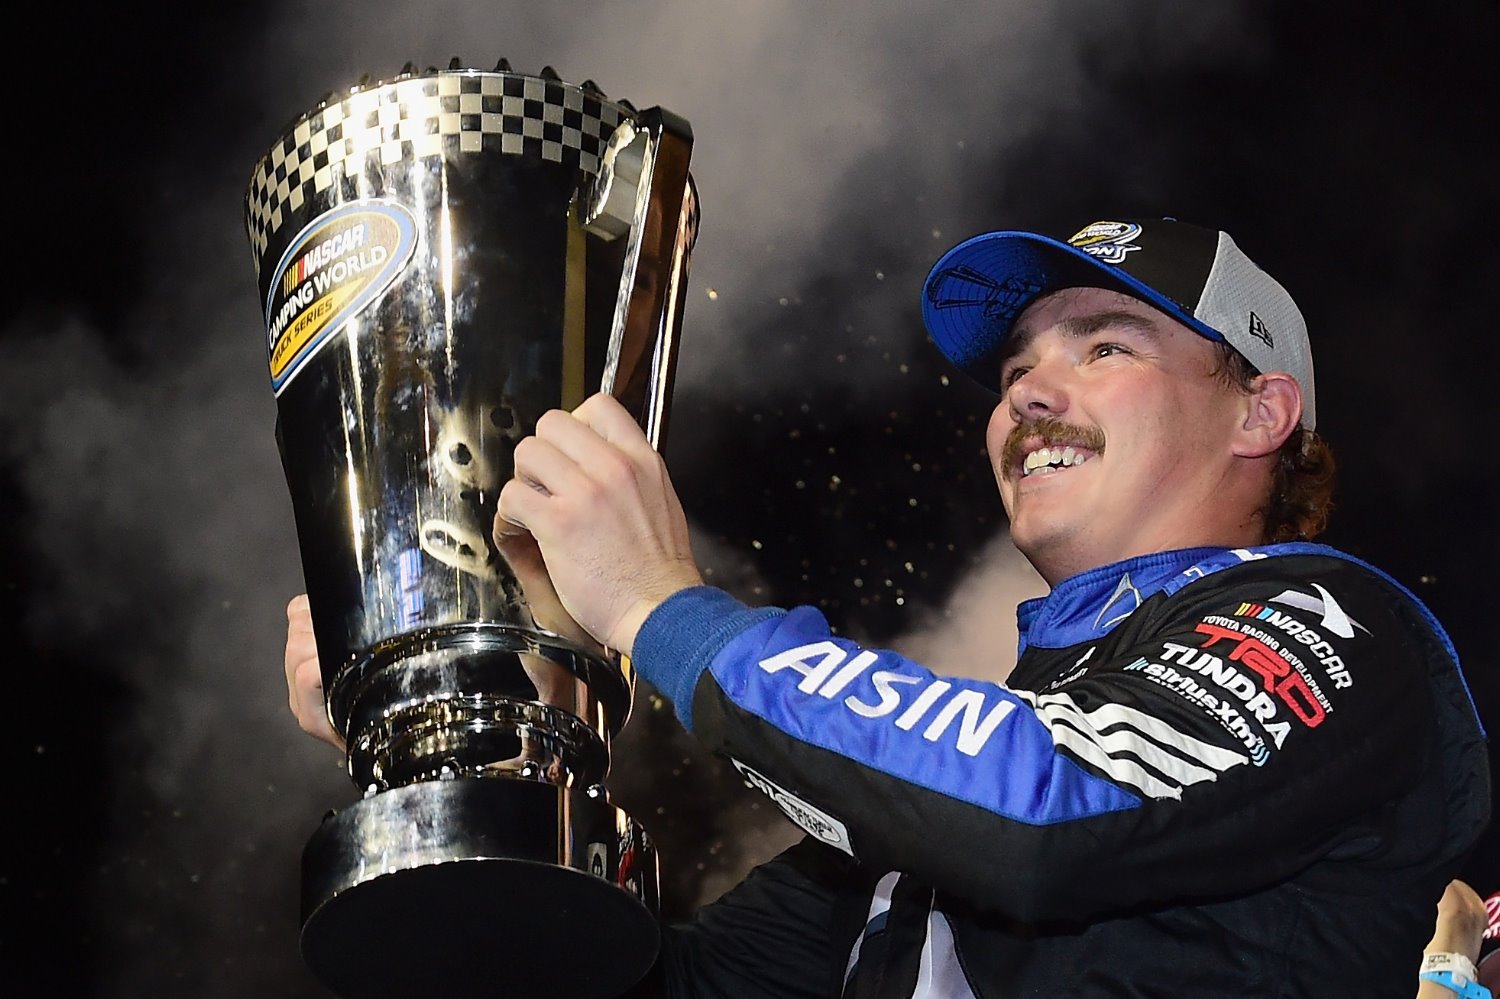 rett Moffitt, driver of the #16 AISIN Group Toyota, celebrates in victory lane with the trophy after winning the NASCAR Camping World Truck Series Ford EcoBoost 200 and the NCWTS Championship